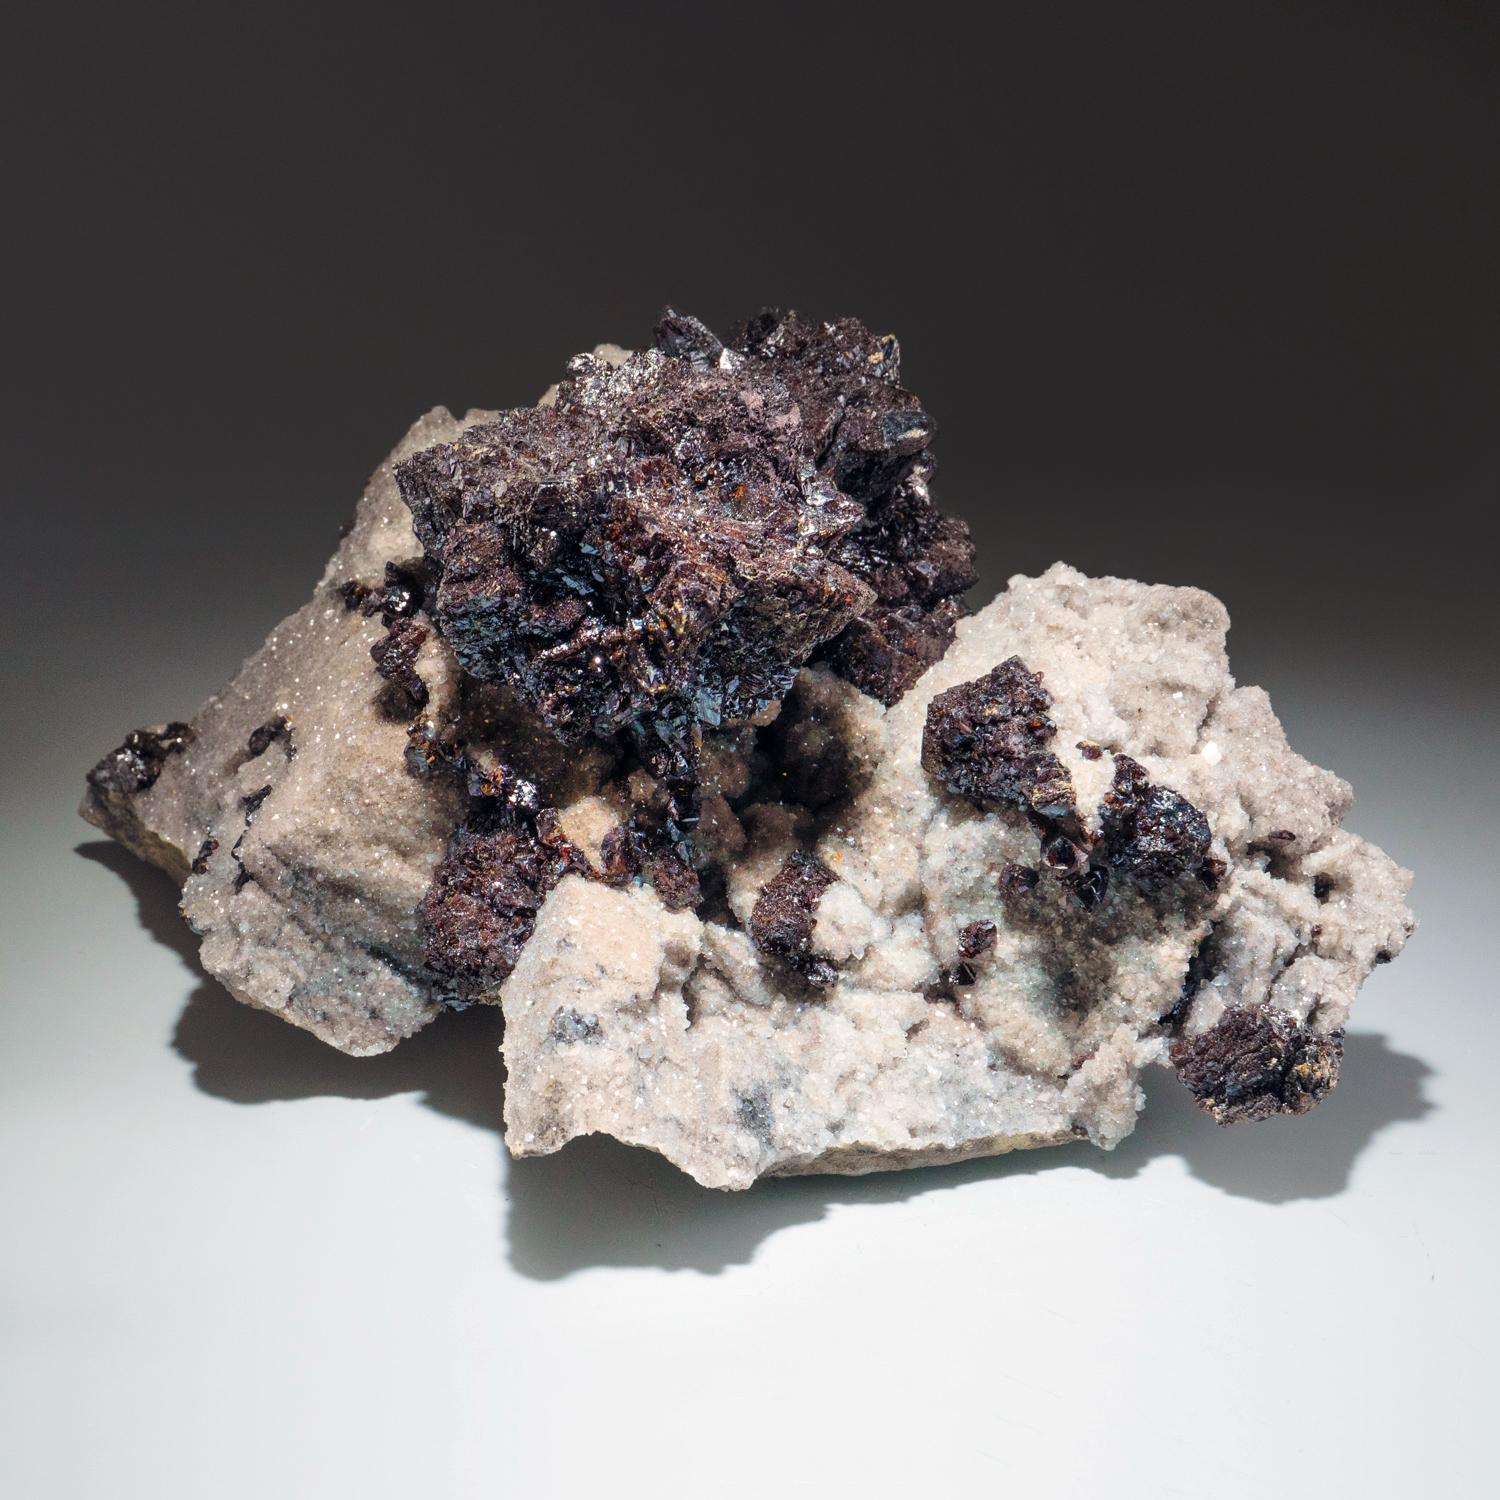 from Dalnegorsk, Primorskiy Kray, Russia Large cabinet specimen of a sparkling cluster of highly lustrous jet black sphalerite crystals in aggregates with rhombic dolomite crystals over small gray-brown quartz crystals atop limestone. The deep black